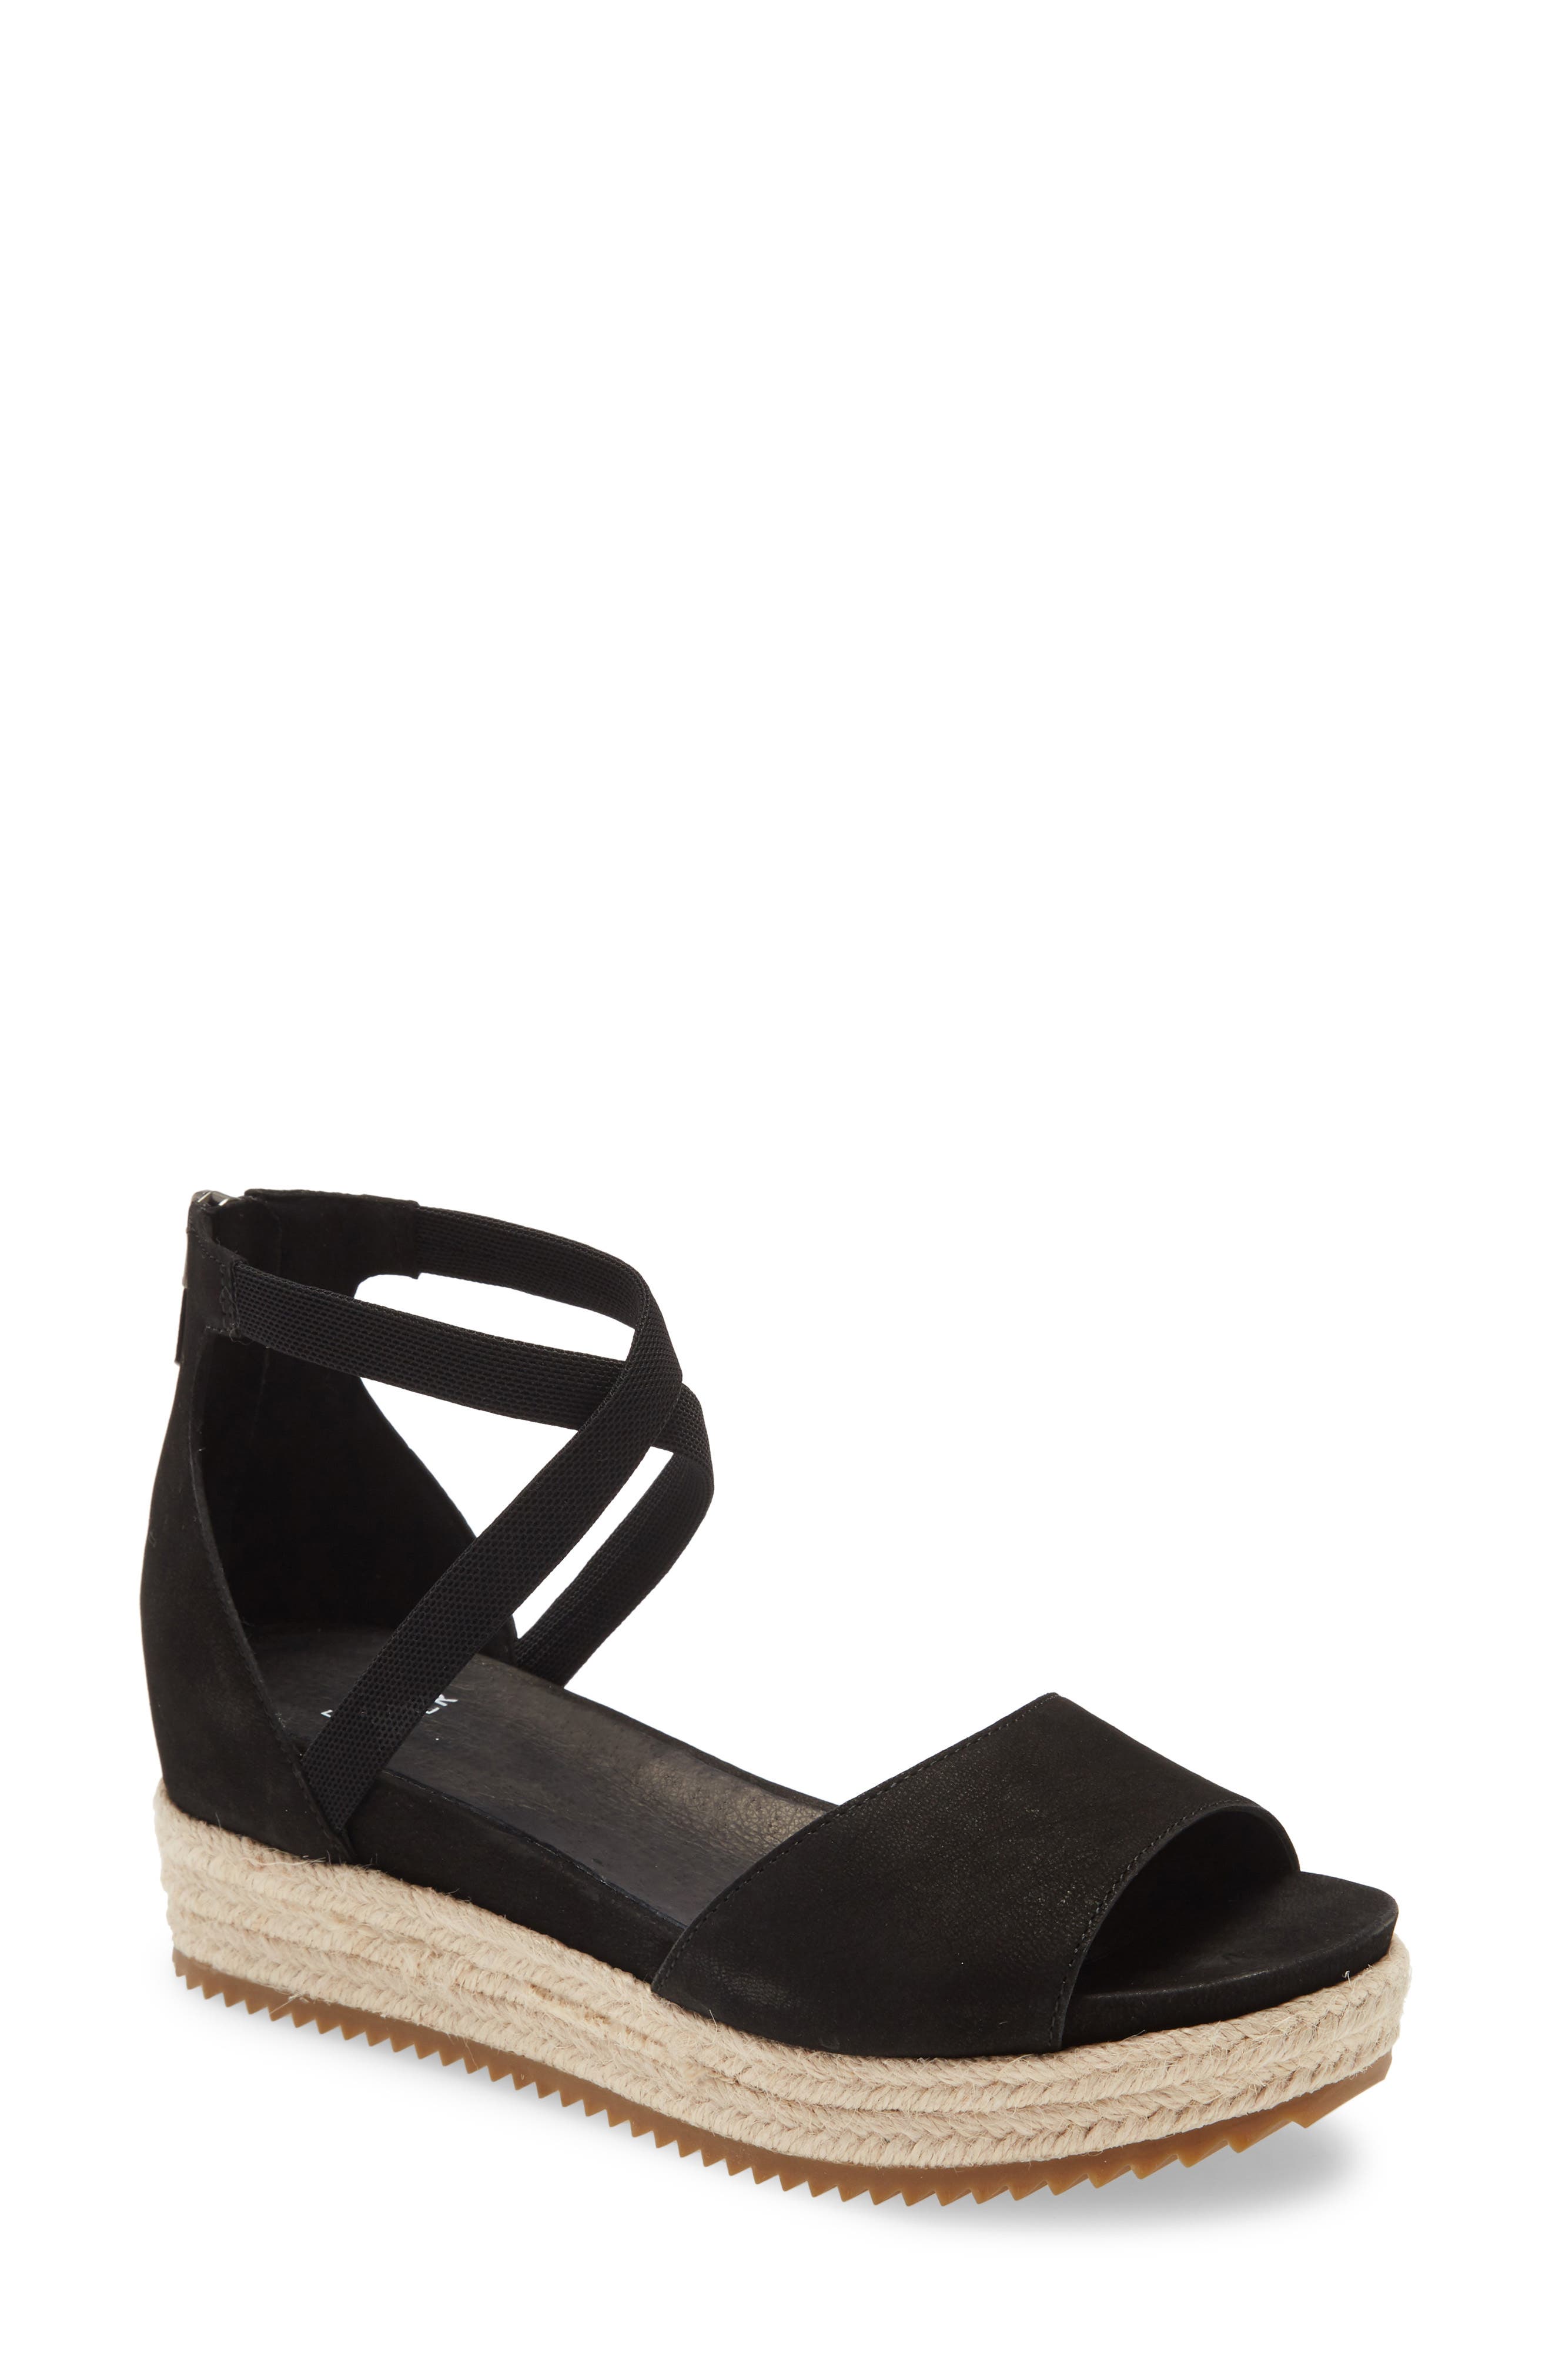 eileen fisher wedge shoes